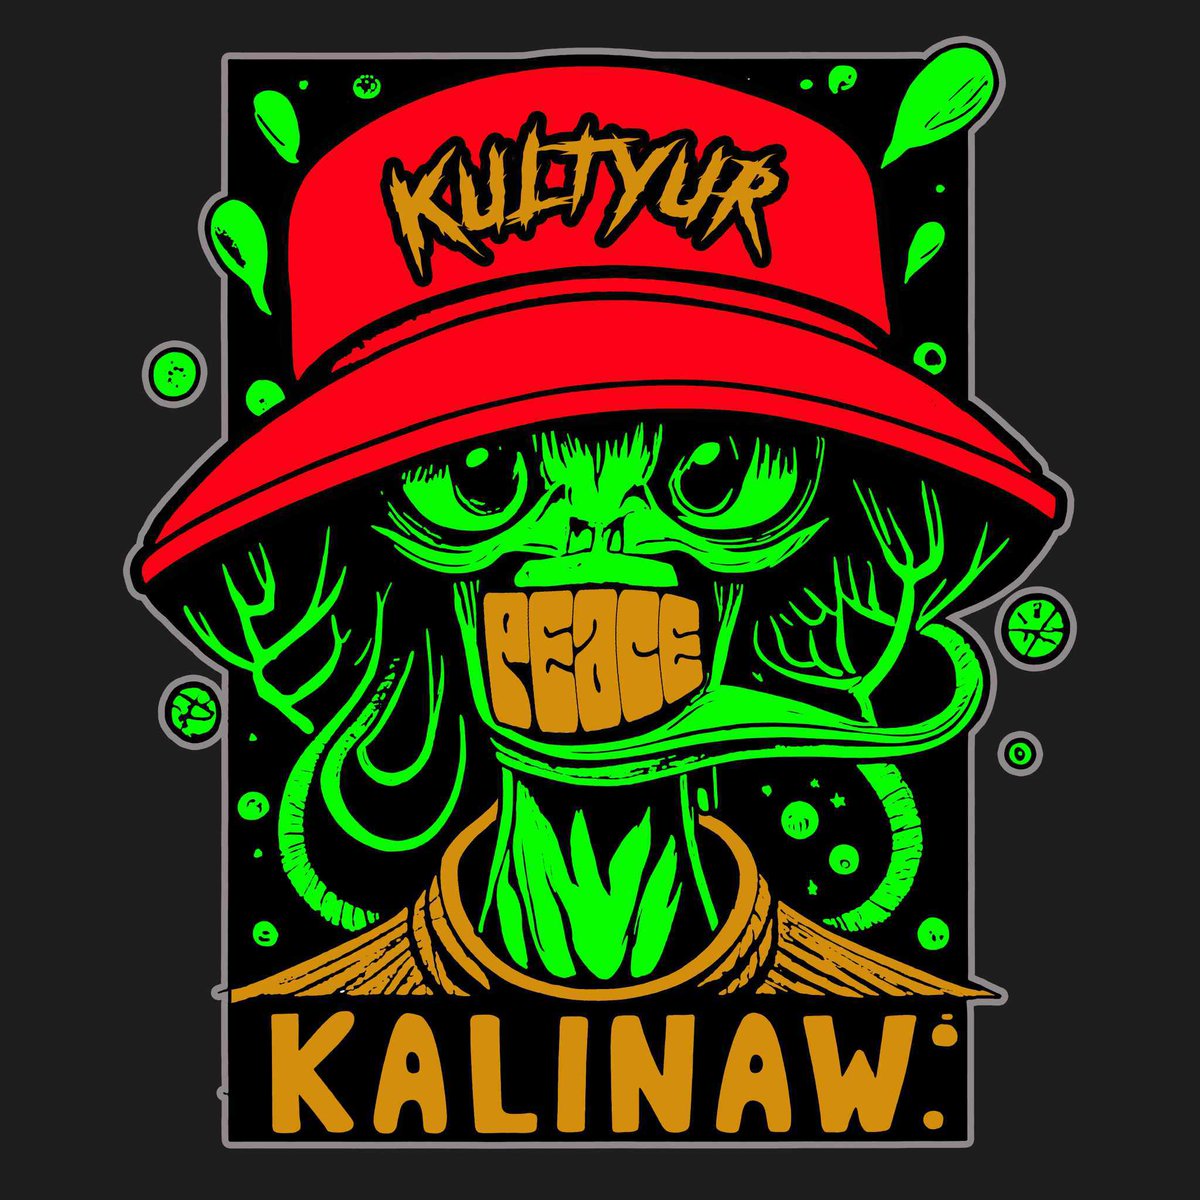 COLLABORATION LOCAL BRAND
KULTYUR x KALINAW
REVERSIBLE BUCKETHAT 👽🛸
🗣️Embroidered LOGO
🗣️Sublimated ART DESIGN 
🗣️ FREE STICKERS
STAY TUNED
DECEMBER COLLECTION ✨
 #kalinaw 
 #localperooriginal 
 #SupportLocalBrandPH 
 #kultyur
 #collaboration